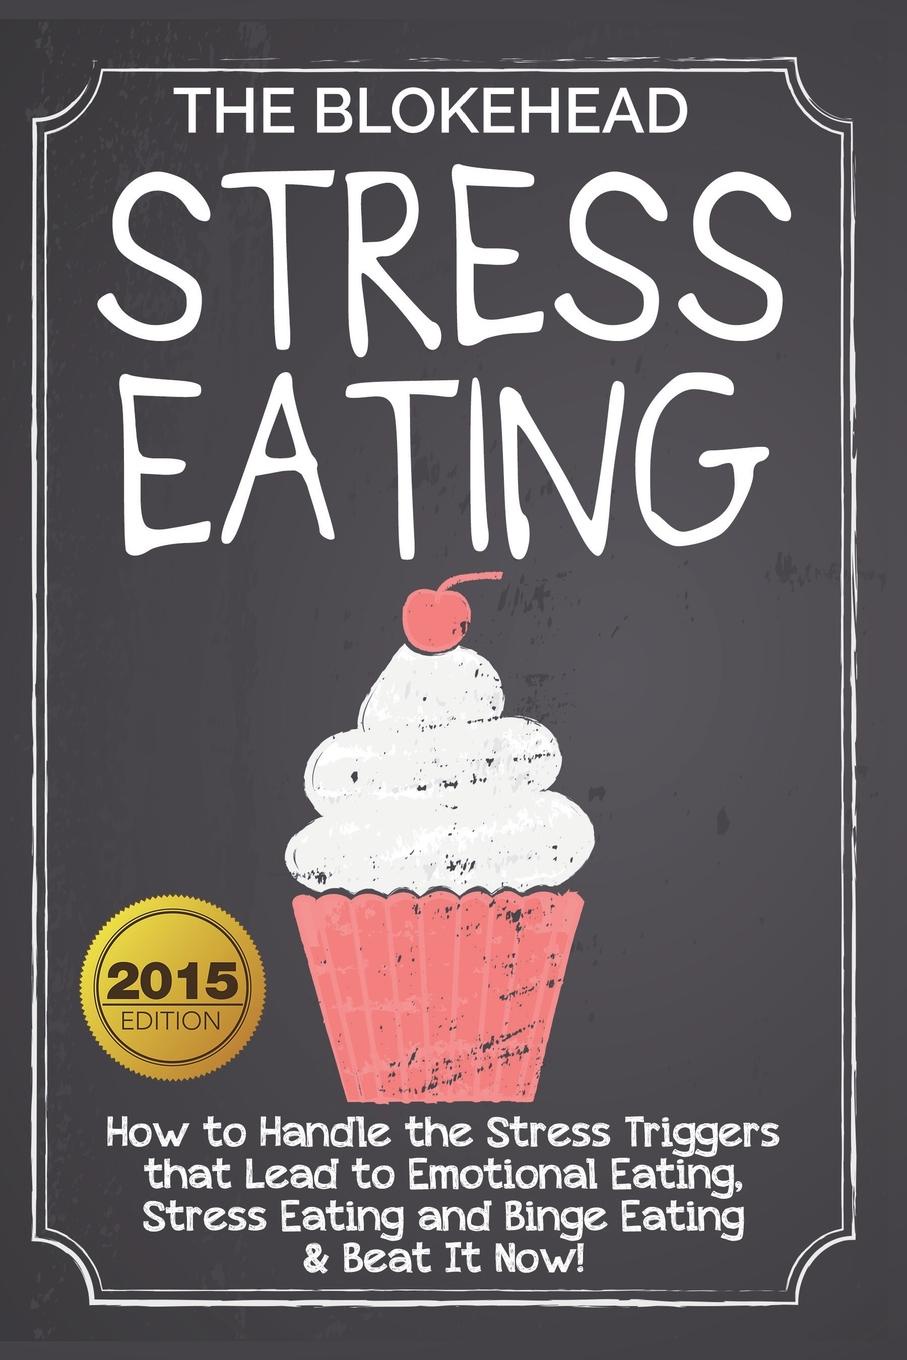 How to eat книга. Stress eating. Beat it and eat it. Eat beat